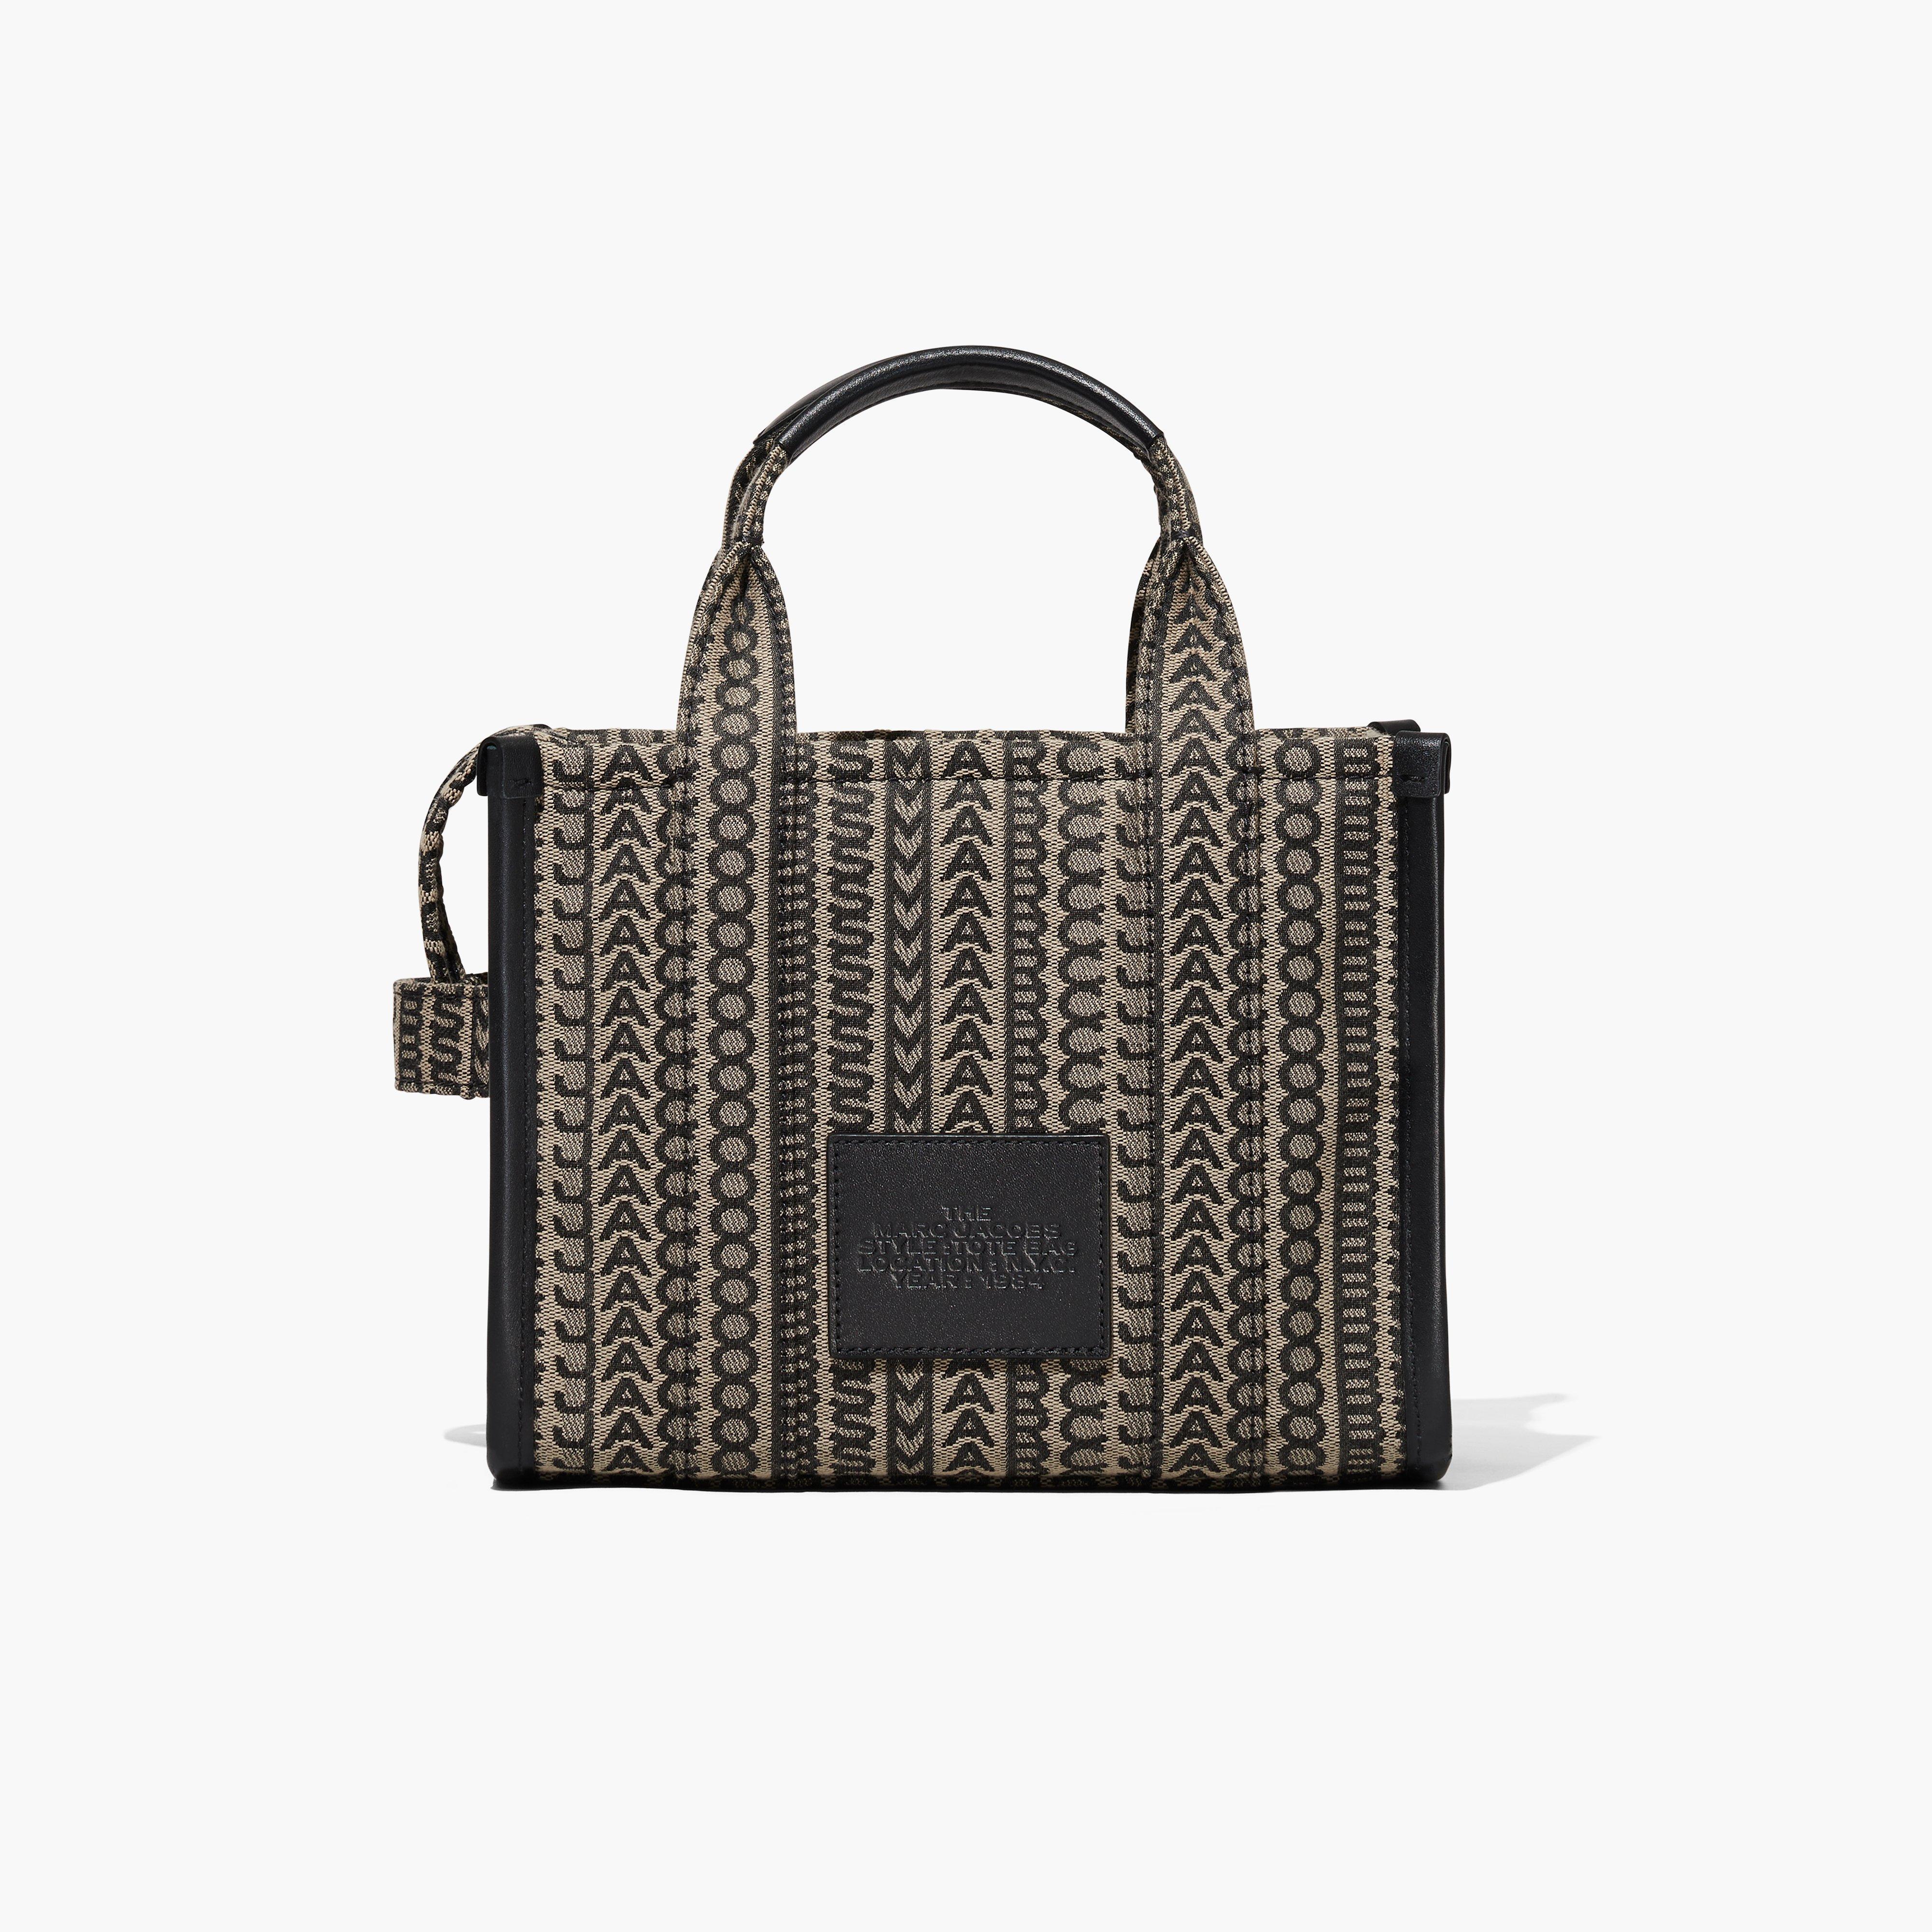 Marc Jacobs The Monogram Small Tote Bag in Black